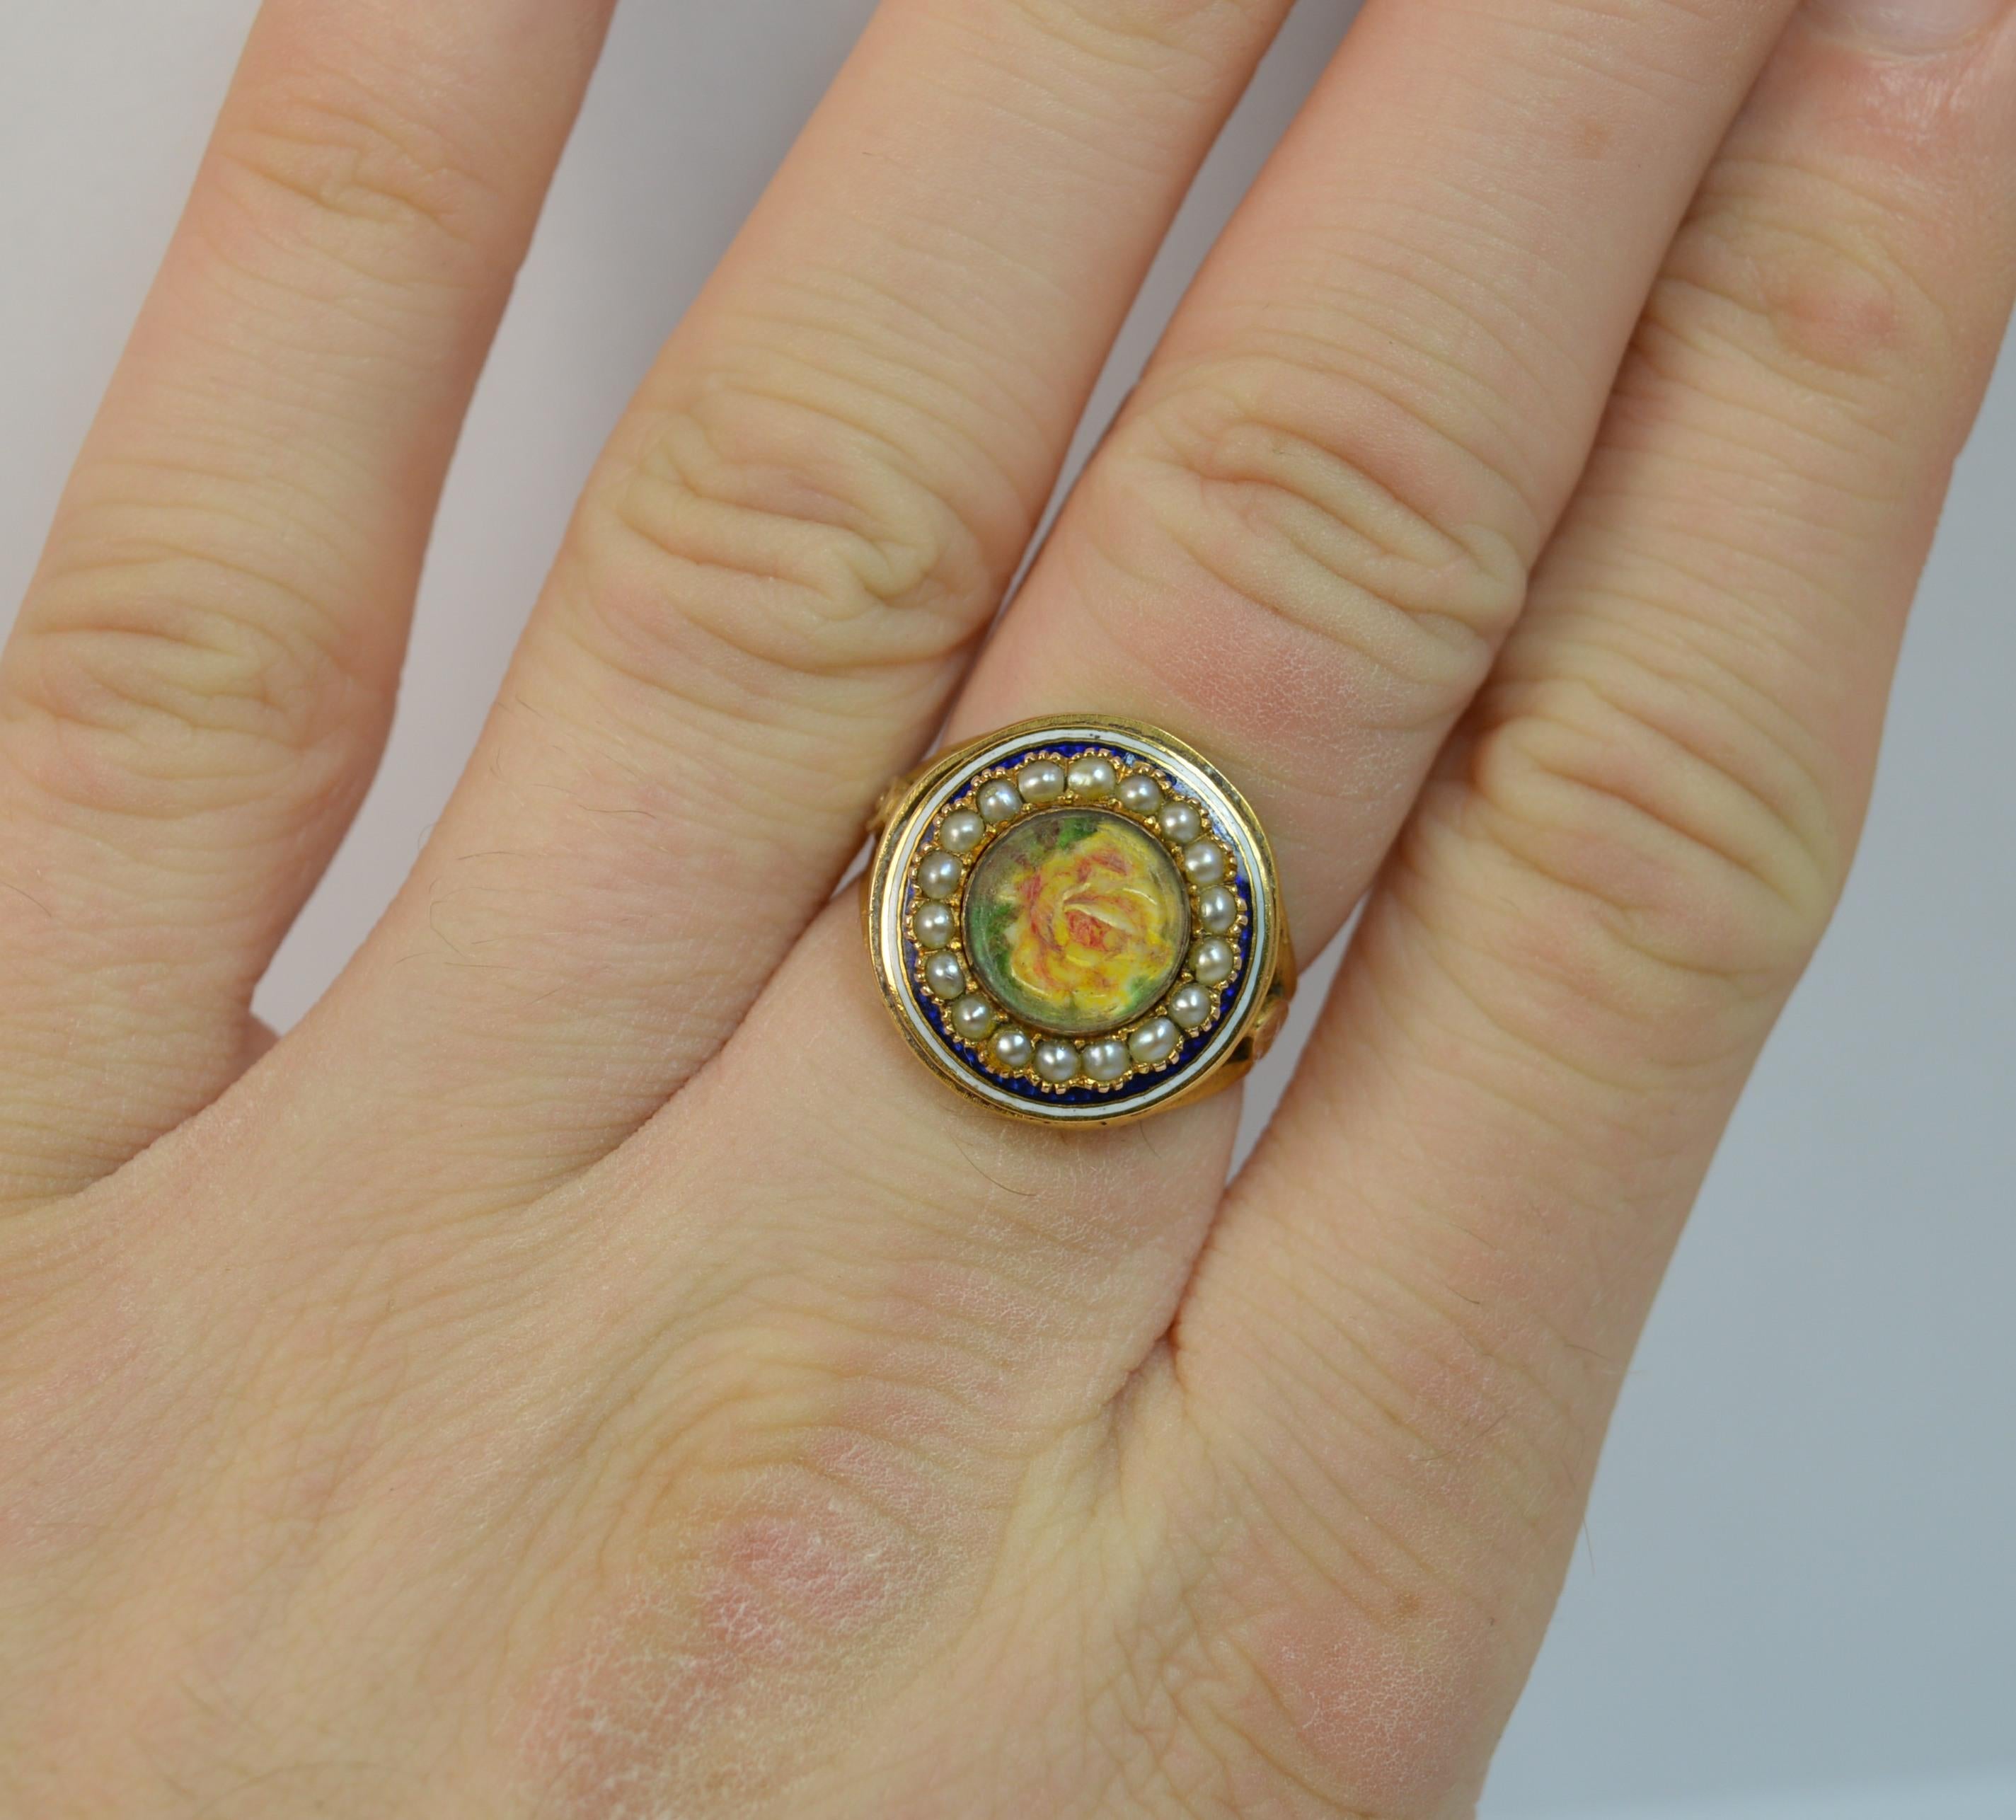 A superb George III period cluster ring.
SIZE ; M 1/2 UK, 6 1/2 US
Sold 15 carat yellow gold ring.

Designed with a rose to the centre, seed pearl surround and blue and white enamelling. 15mm diameter head.


CONDITION ; Good for age. Clean shank,